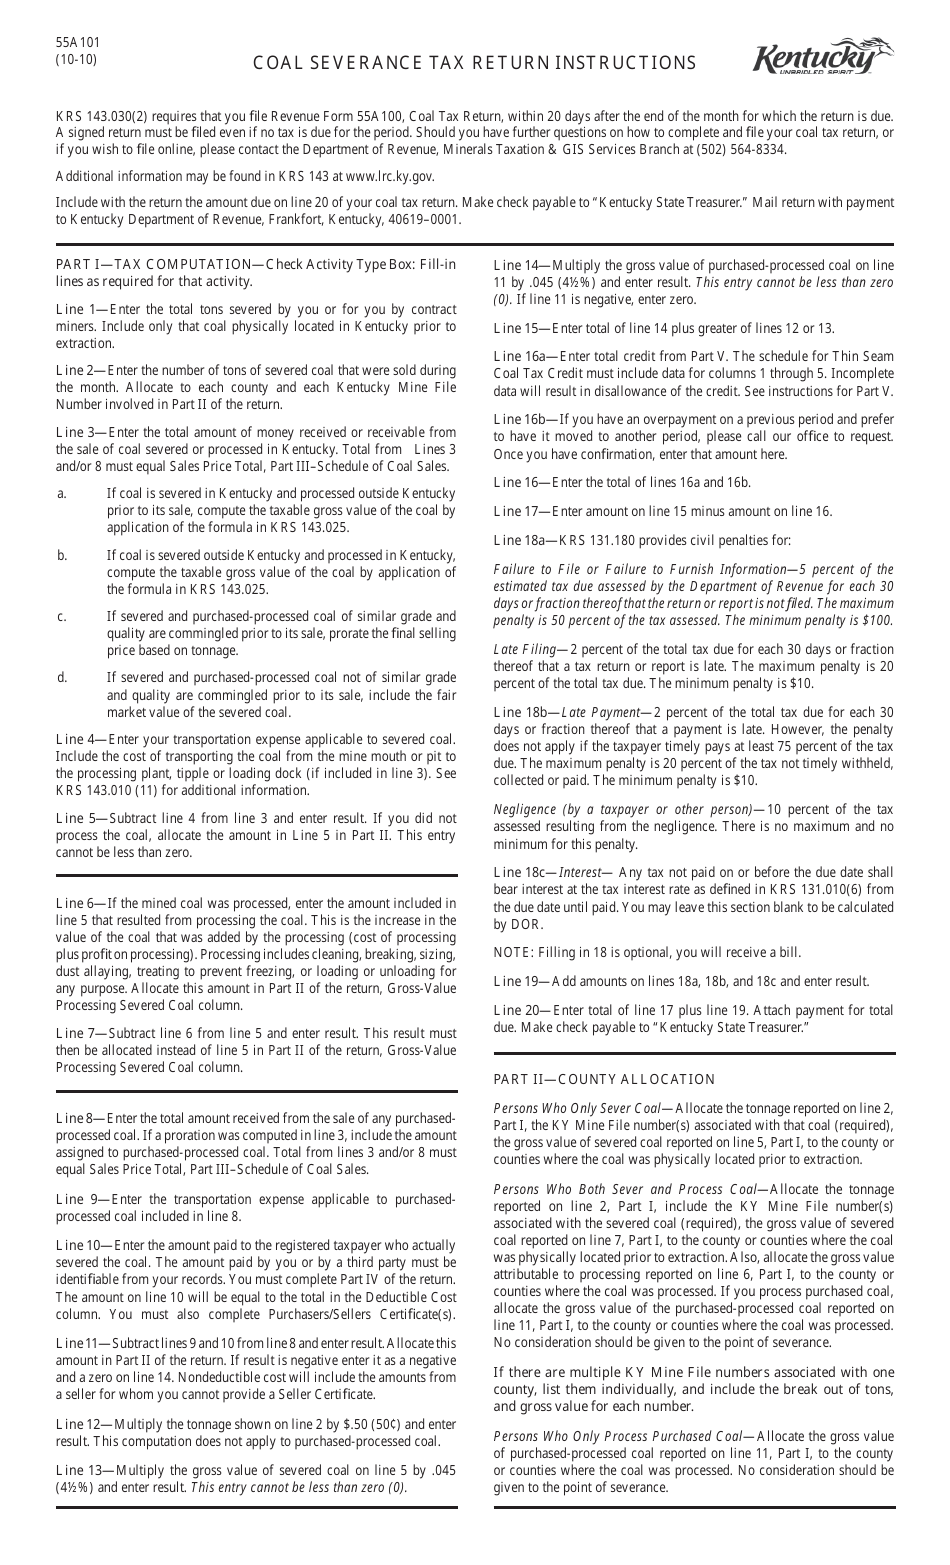 Instructions for Form 55A100 Coal Severance Tax Return - Kentucky, Page 1